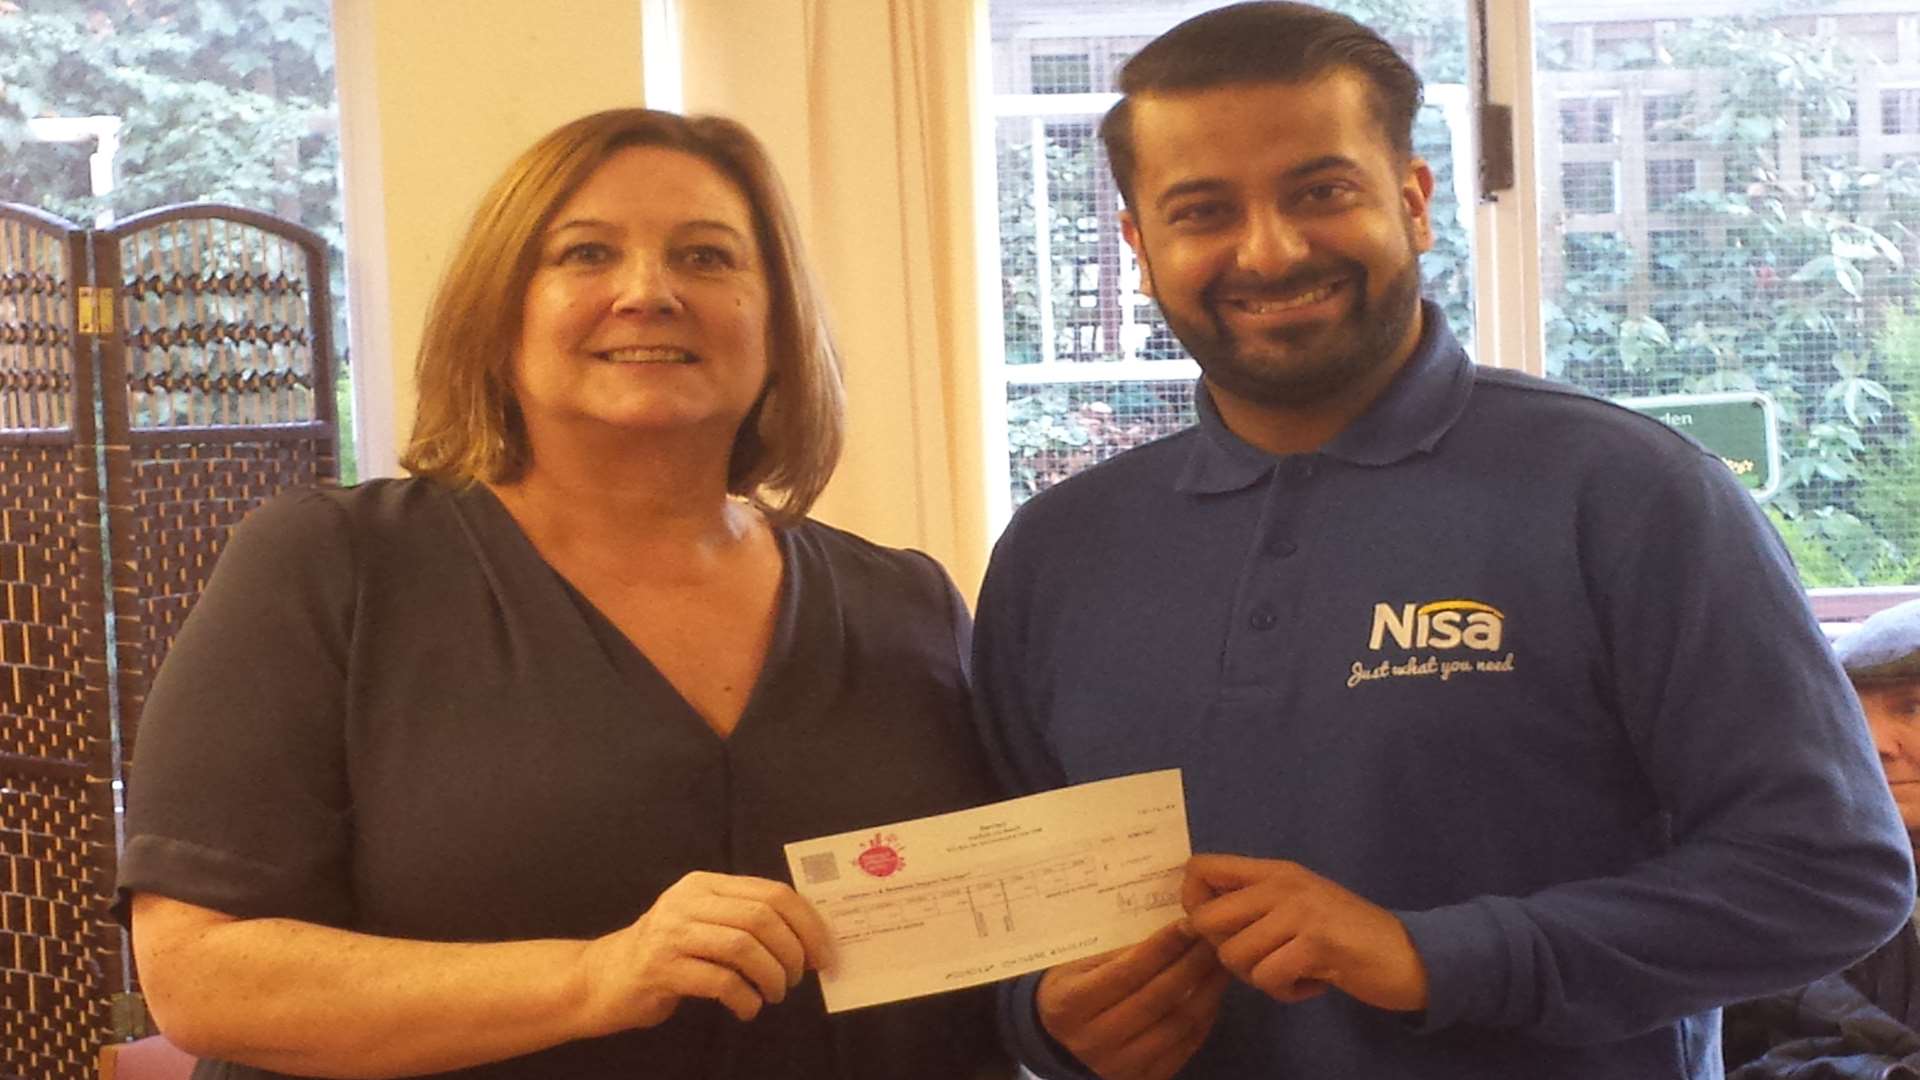 Jazz Goraya from Nisa presents the cheque to day care manager Lynn Lidstone